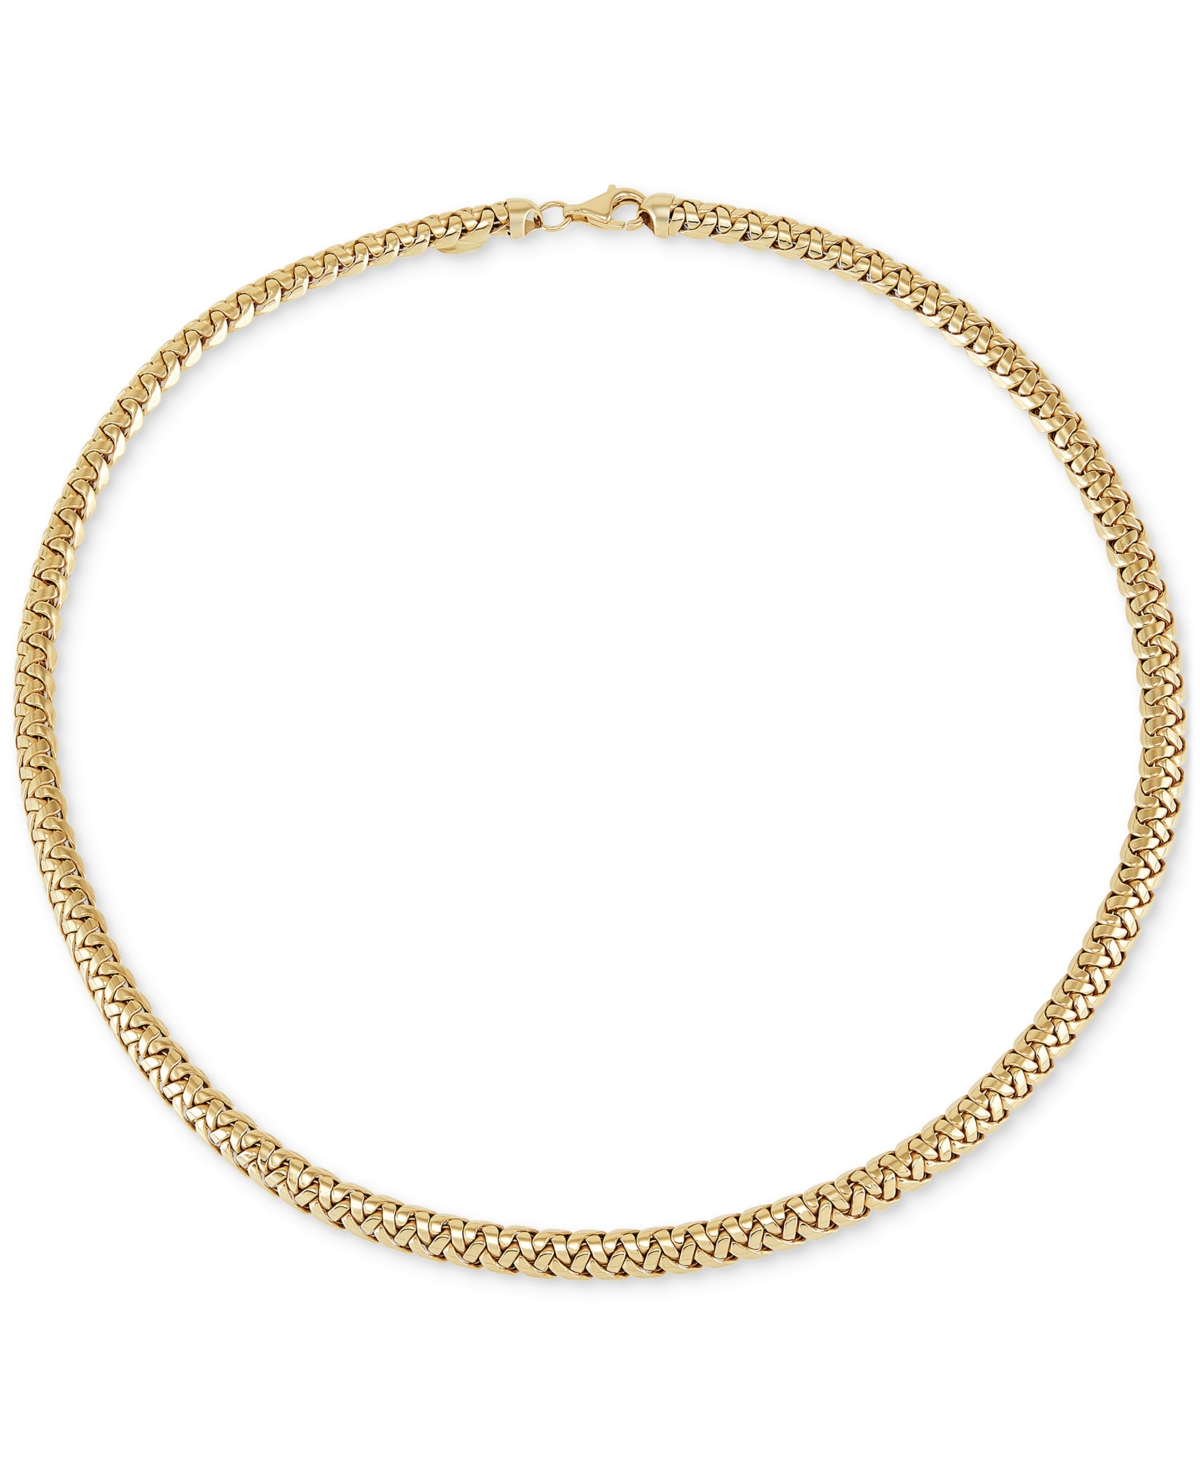 Polished Woven Link 17" Chain Necklace in 14k Gold - Yellow Gold